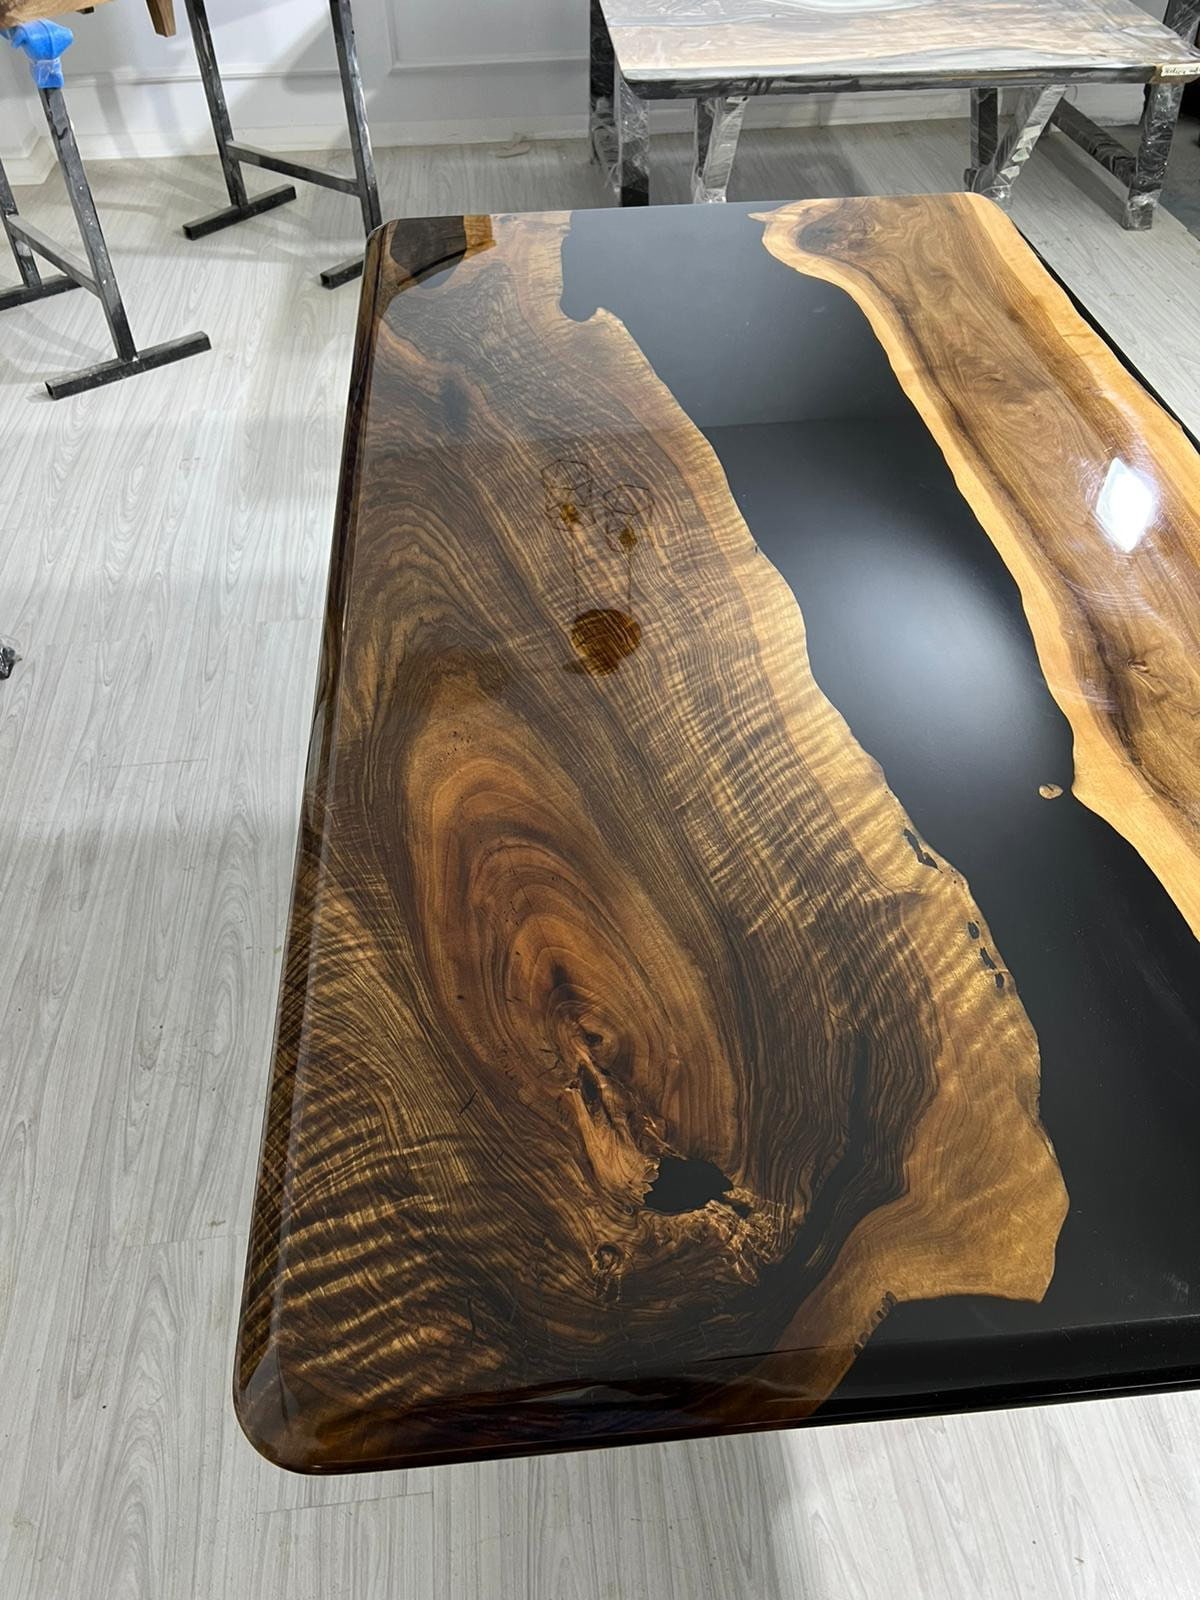 72 x 21 Epoxy Wooden Table Top / Epoxy Resin Table Top / Home Decor